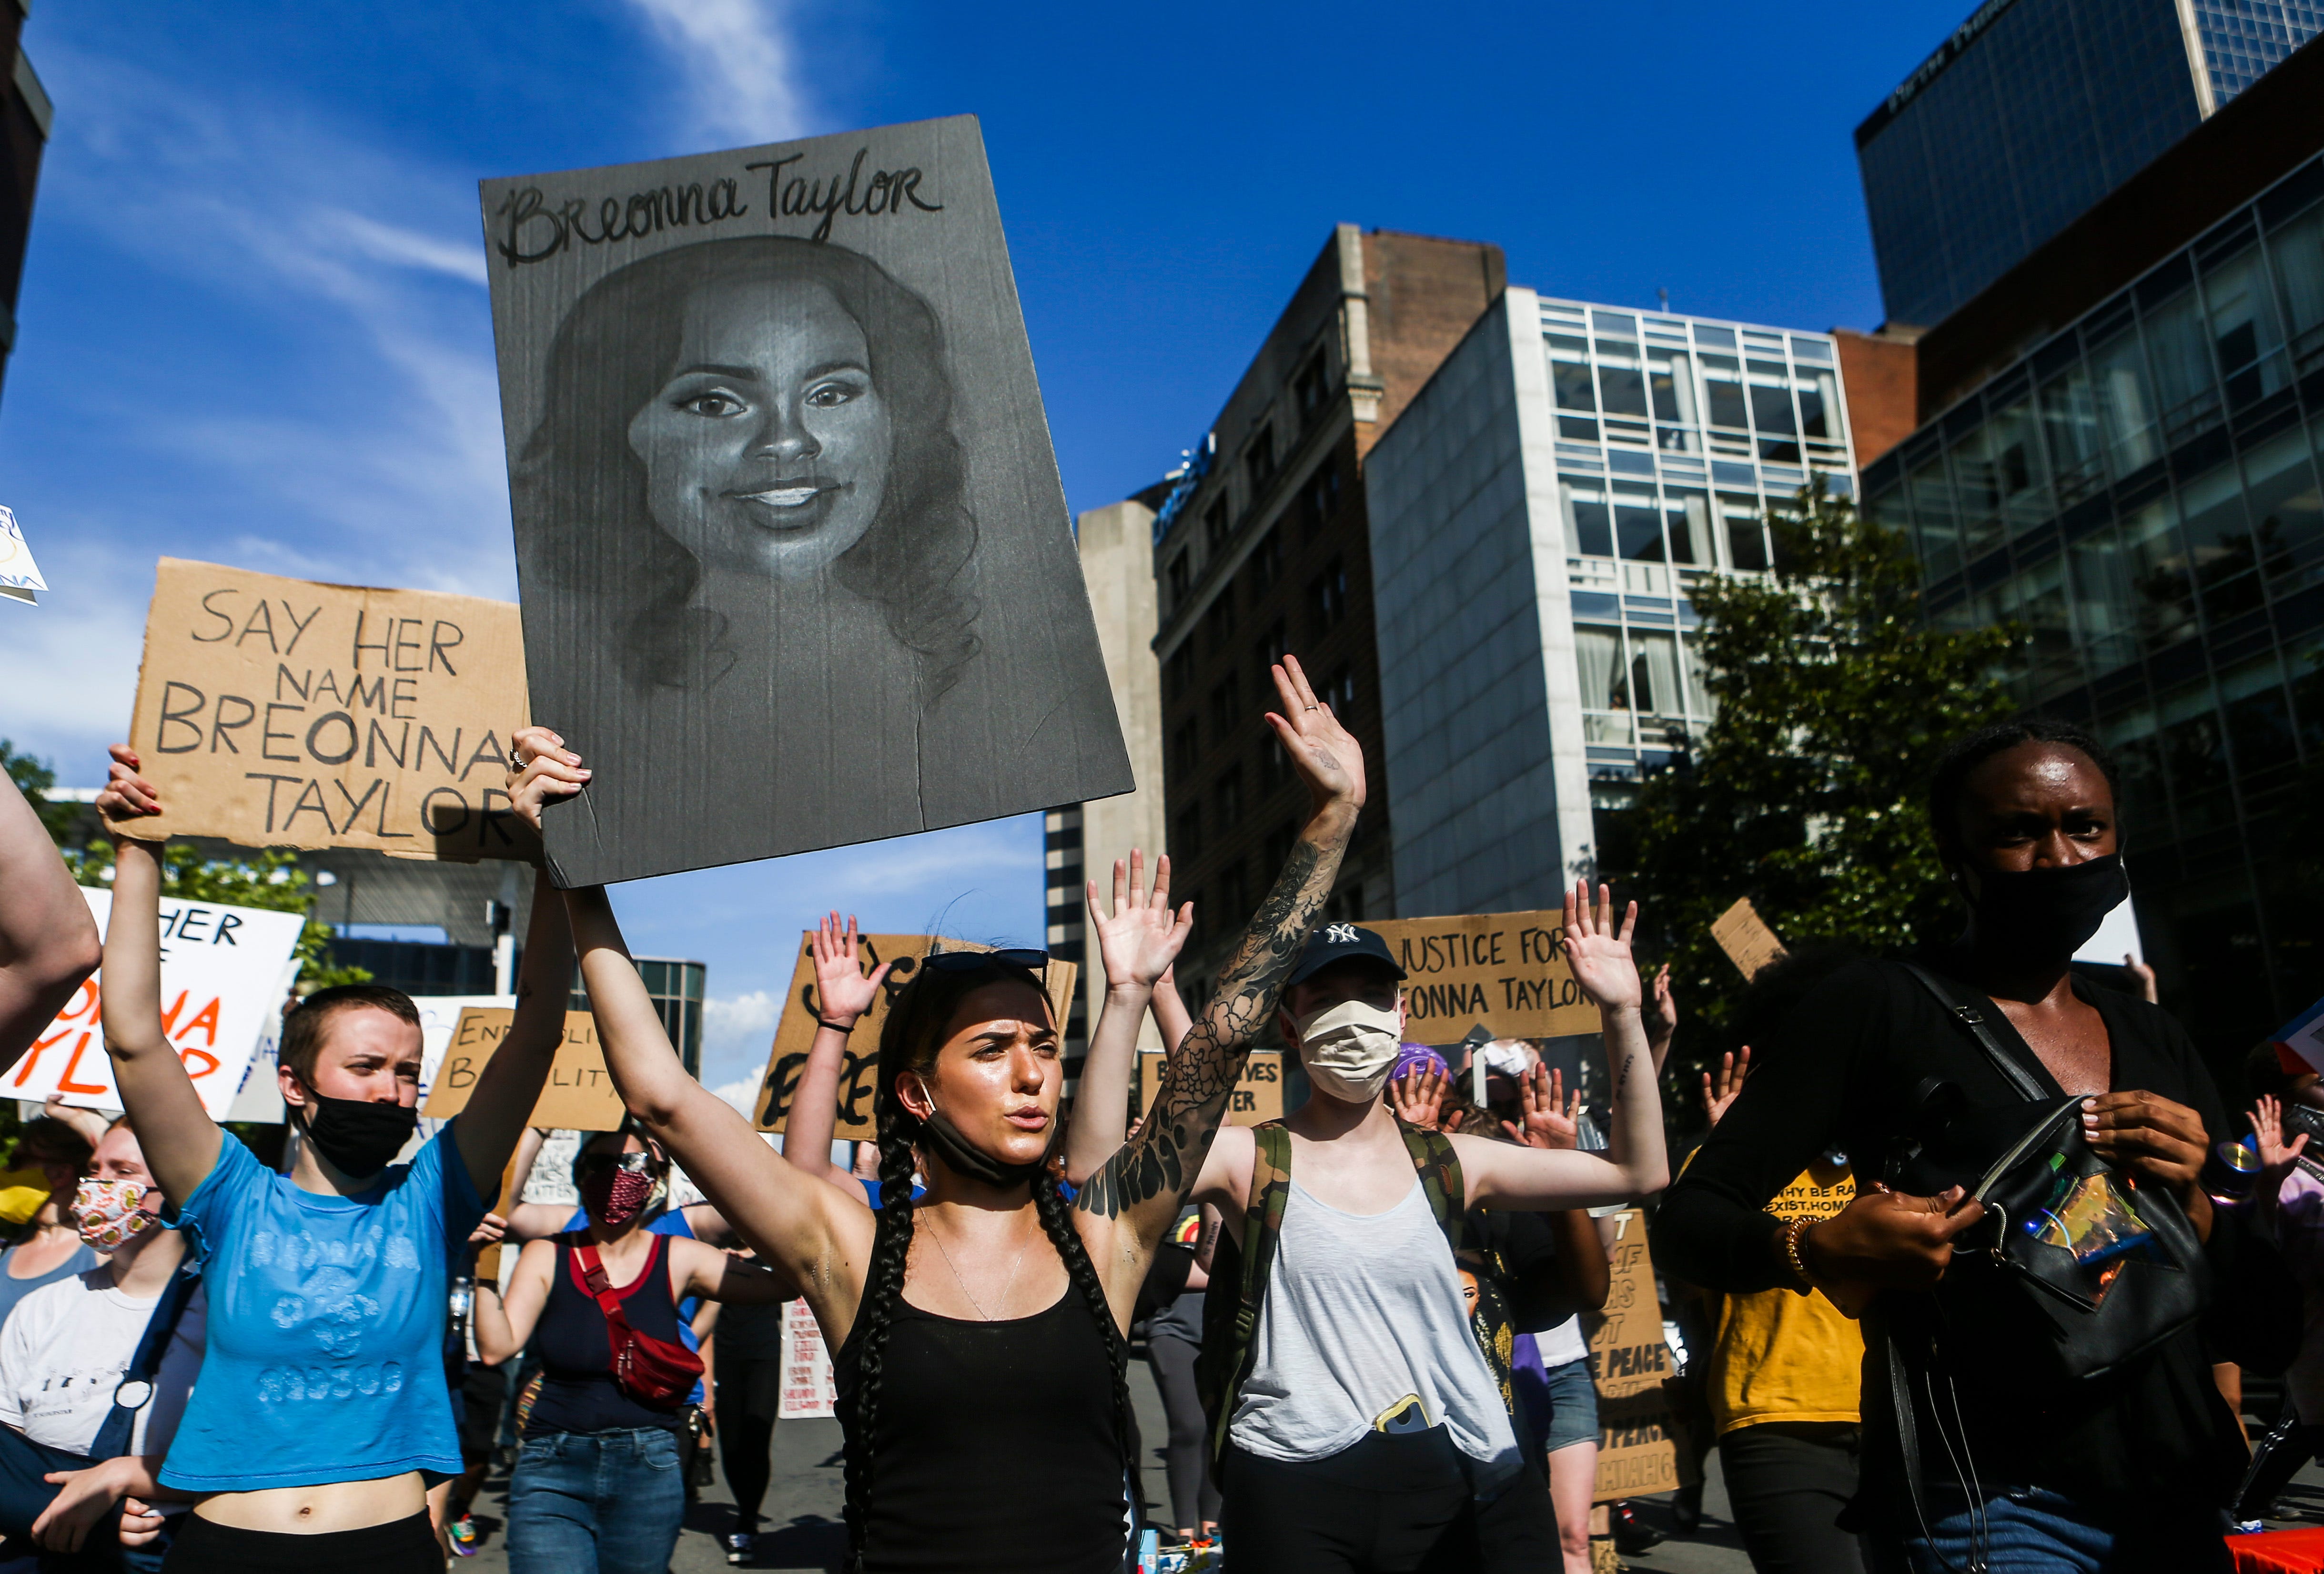 Demonstrators take to the streets of Louisville, Ky., on June 5 to protest the death of EMT Breonna Taylor, who was shot eight times by police during a raid. The officers involved have not been fired.